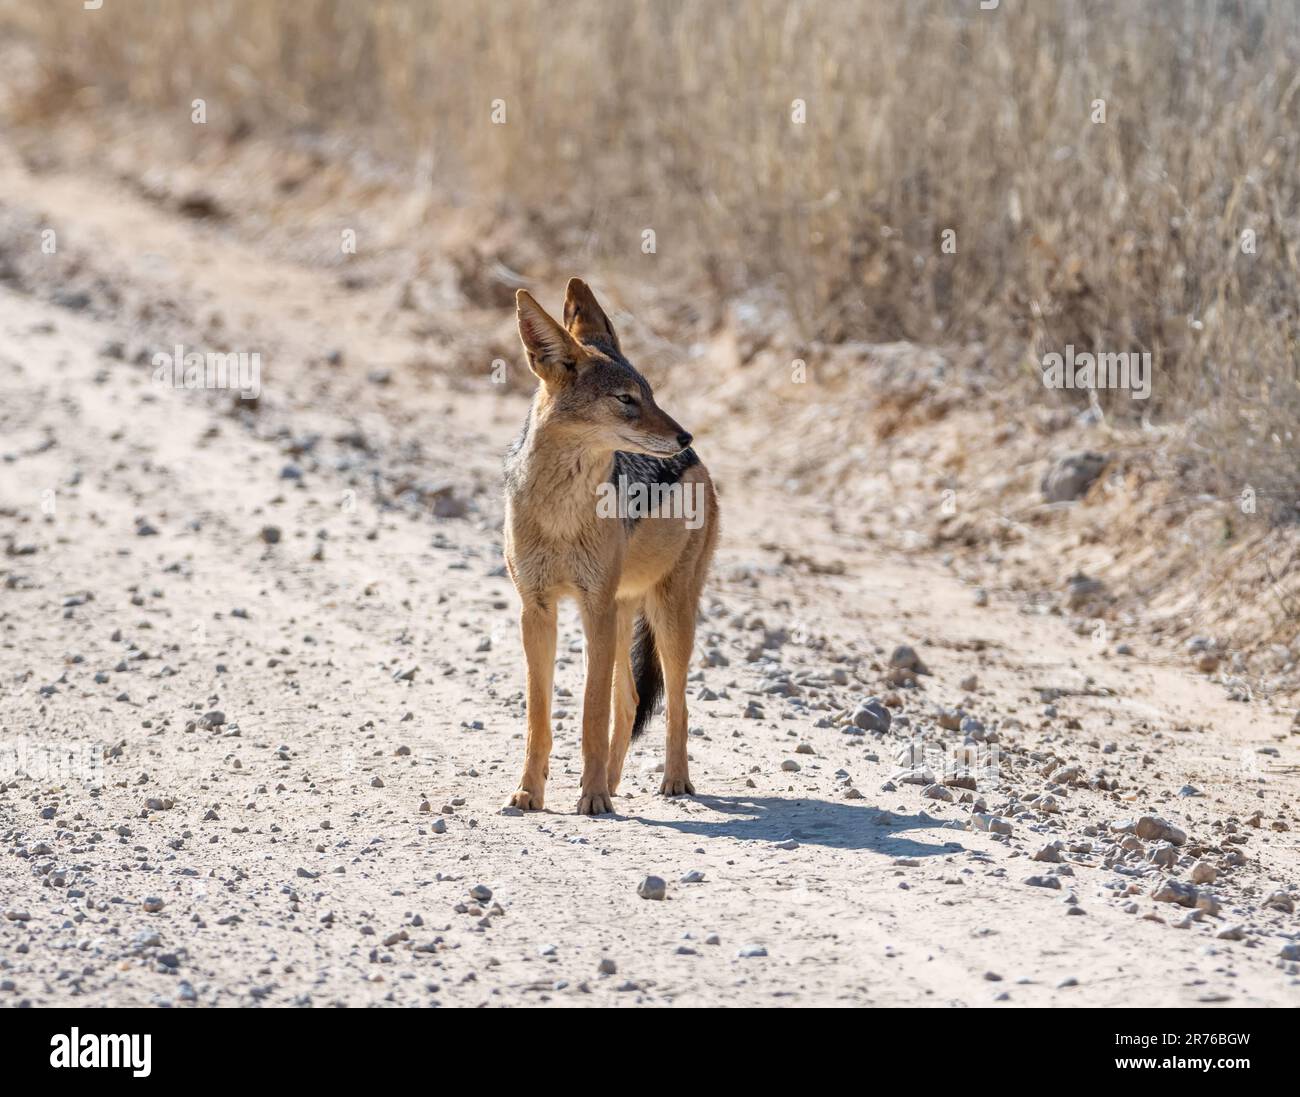 A Black-backed Jackal standing on a dirt track in Southern African savannah Stock Photo